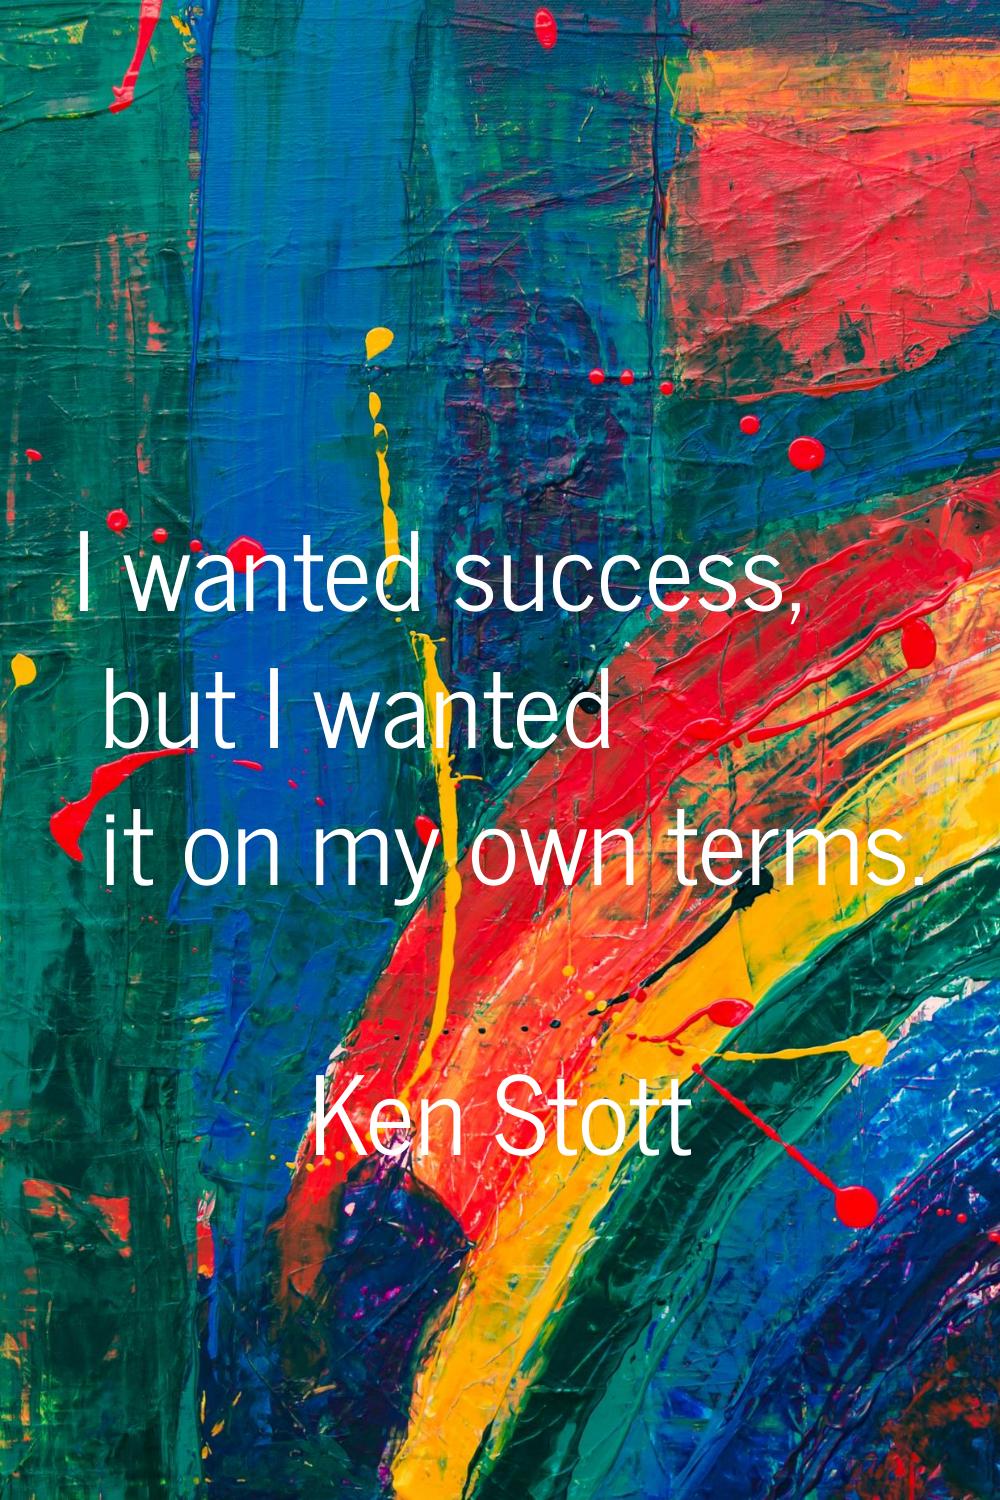 I wanted success, but I wanted it on my own terms.